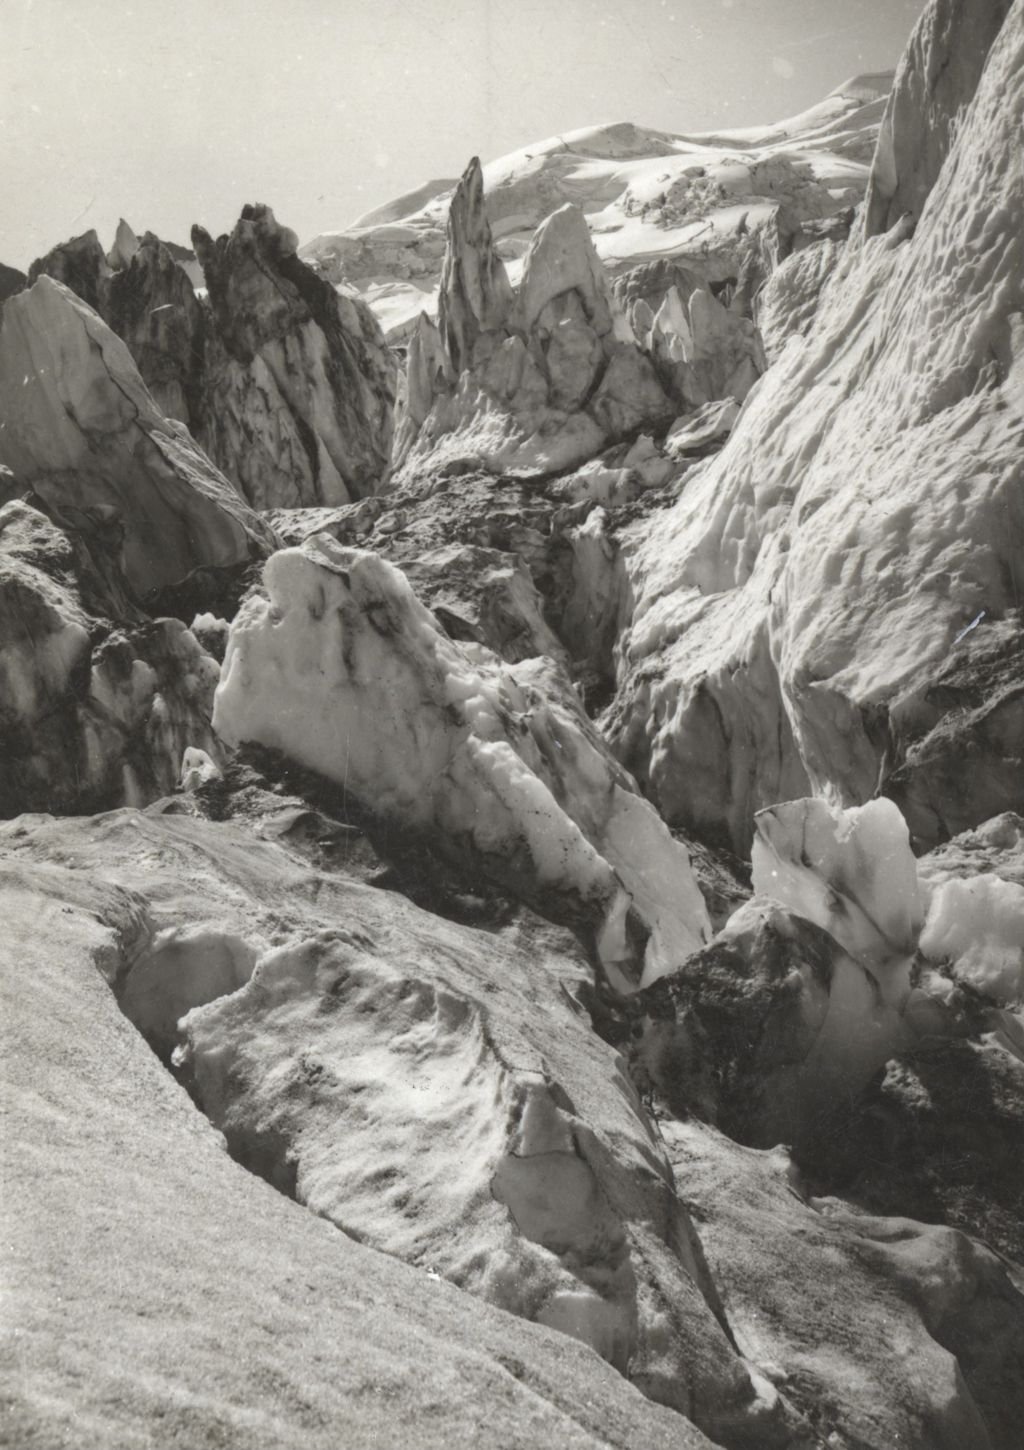 Landscape photographed during Jane Addams' trip to Mexico